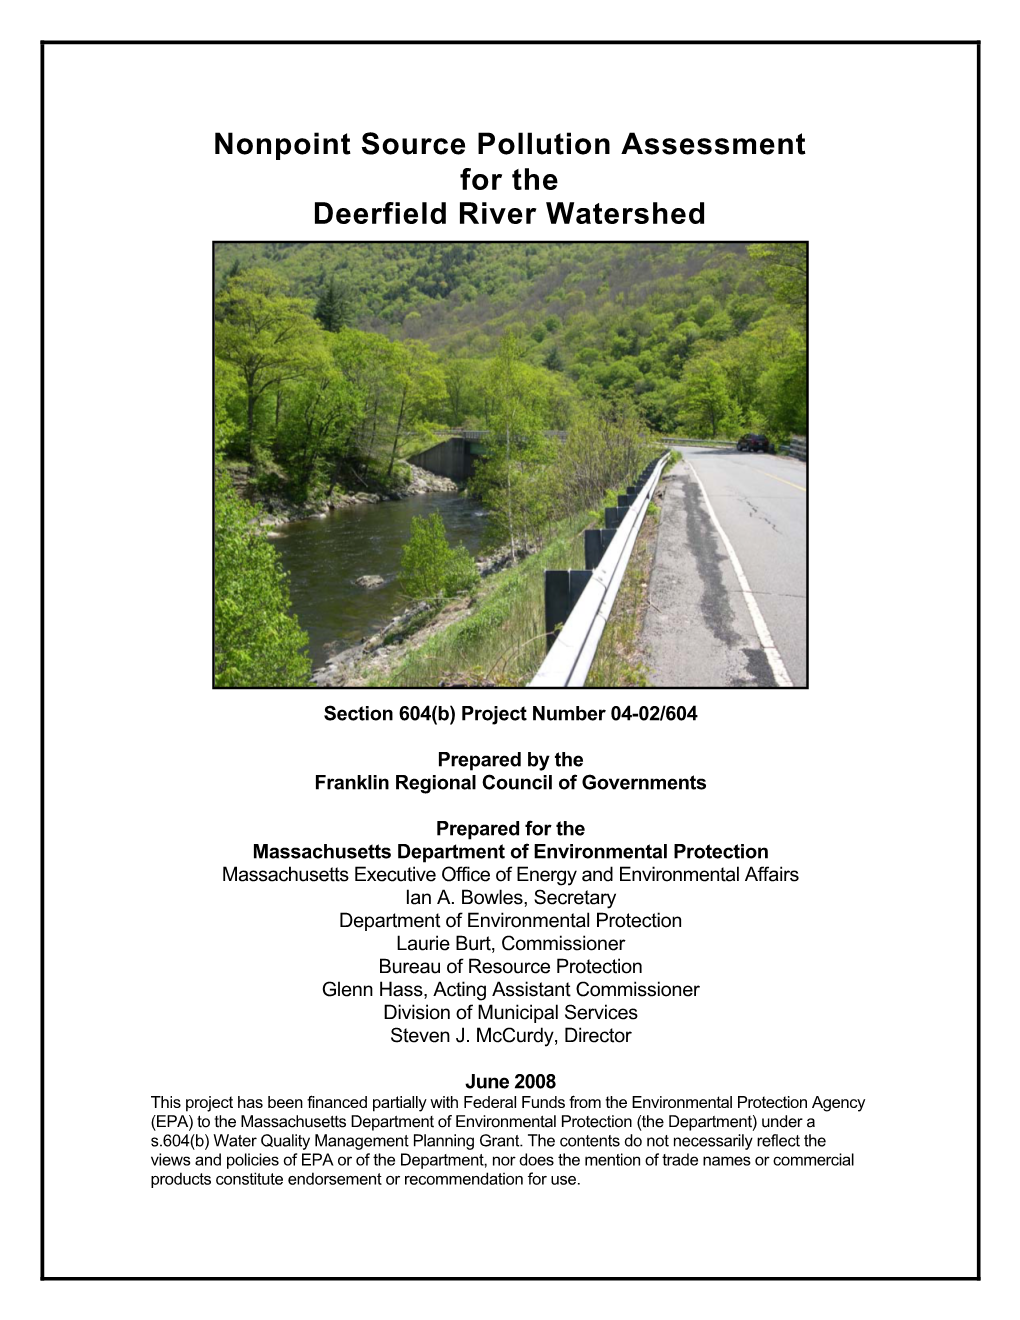 Nonpoint Source Pollution Assessment for the Deerfield River Watershed